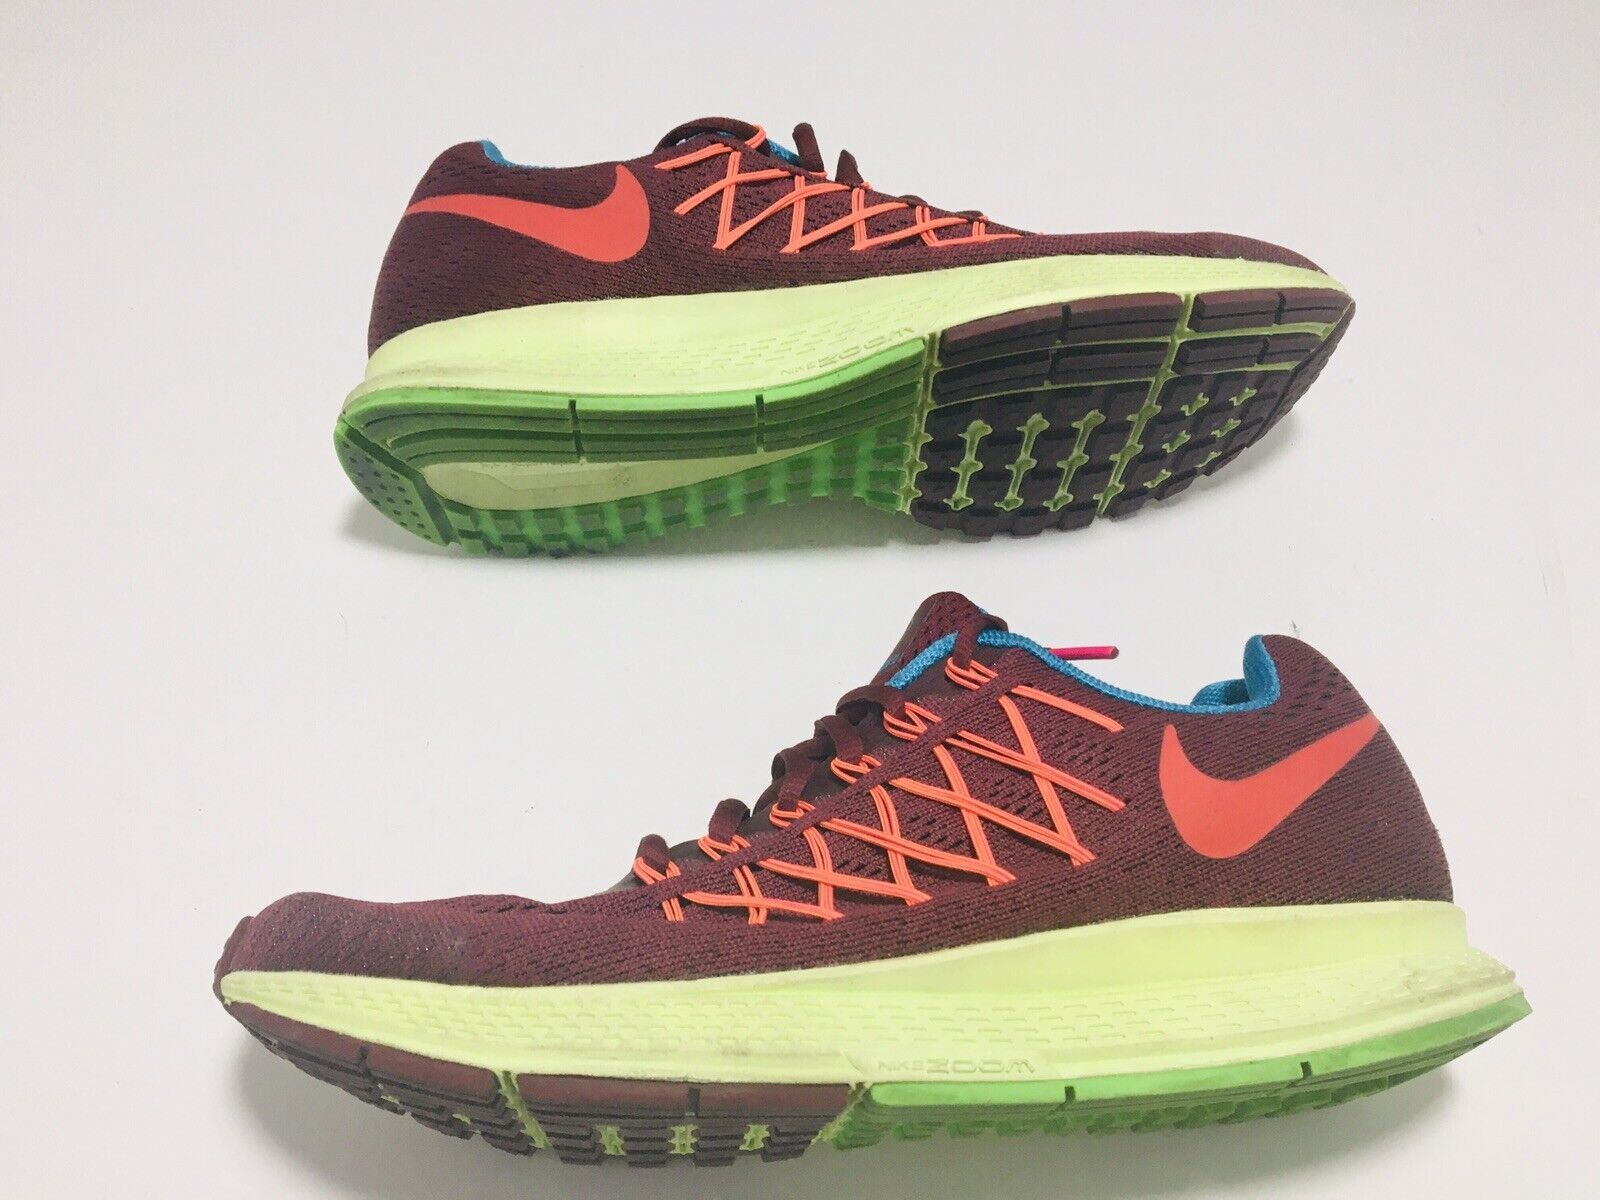 Primary image for Nike Zoom Pegasus 32 Running Shoes Burgundy Blue Green 811339-663 Women's Sz 10M